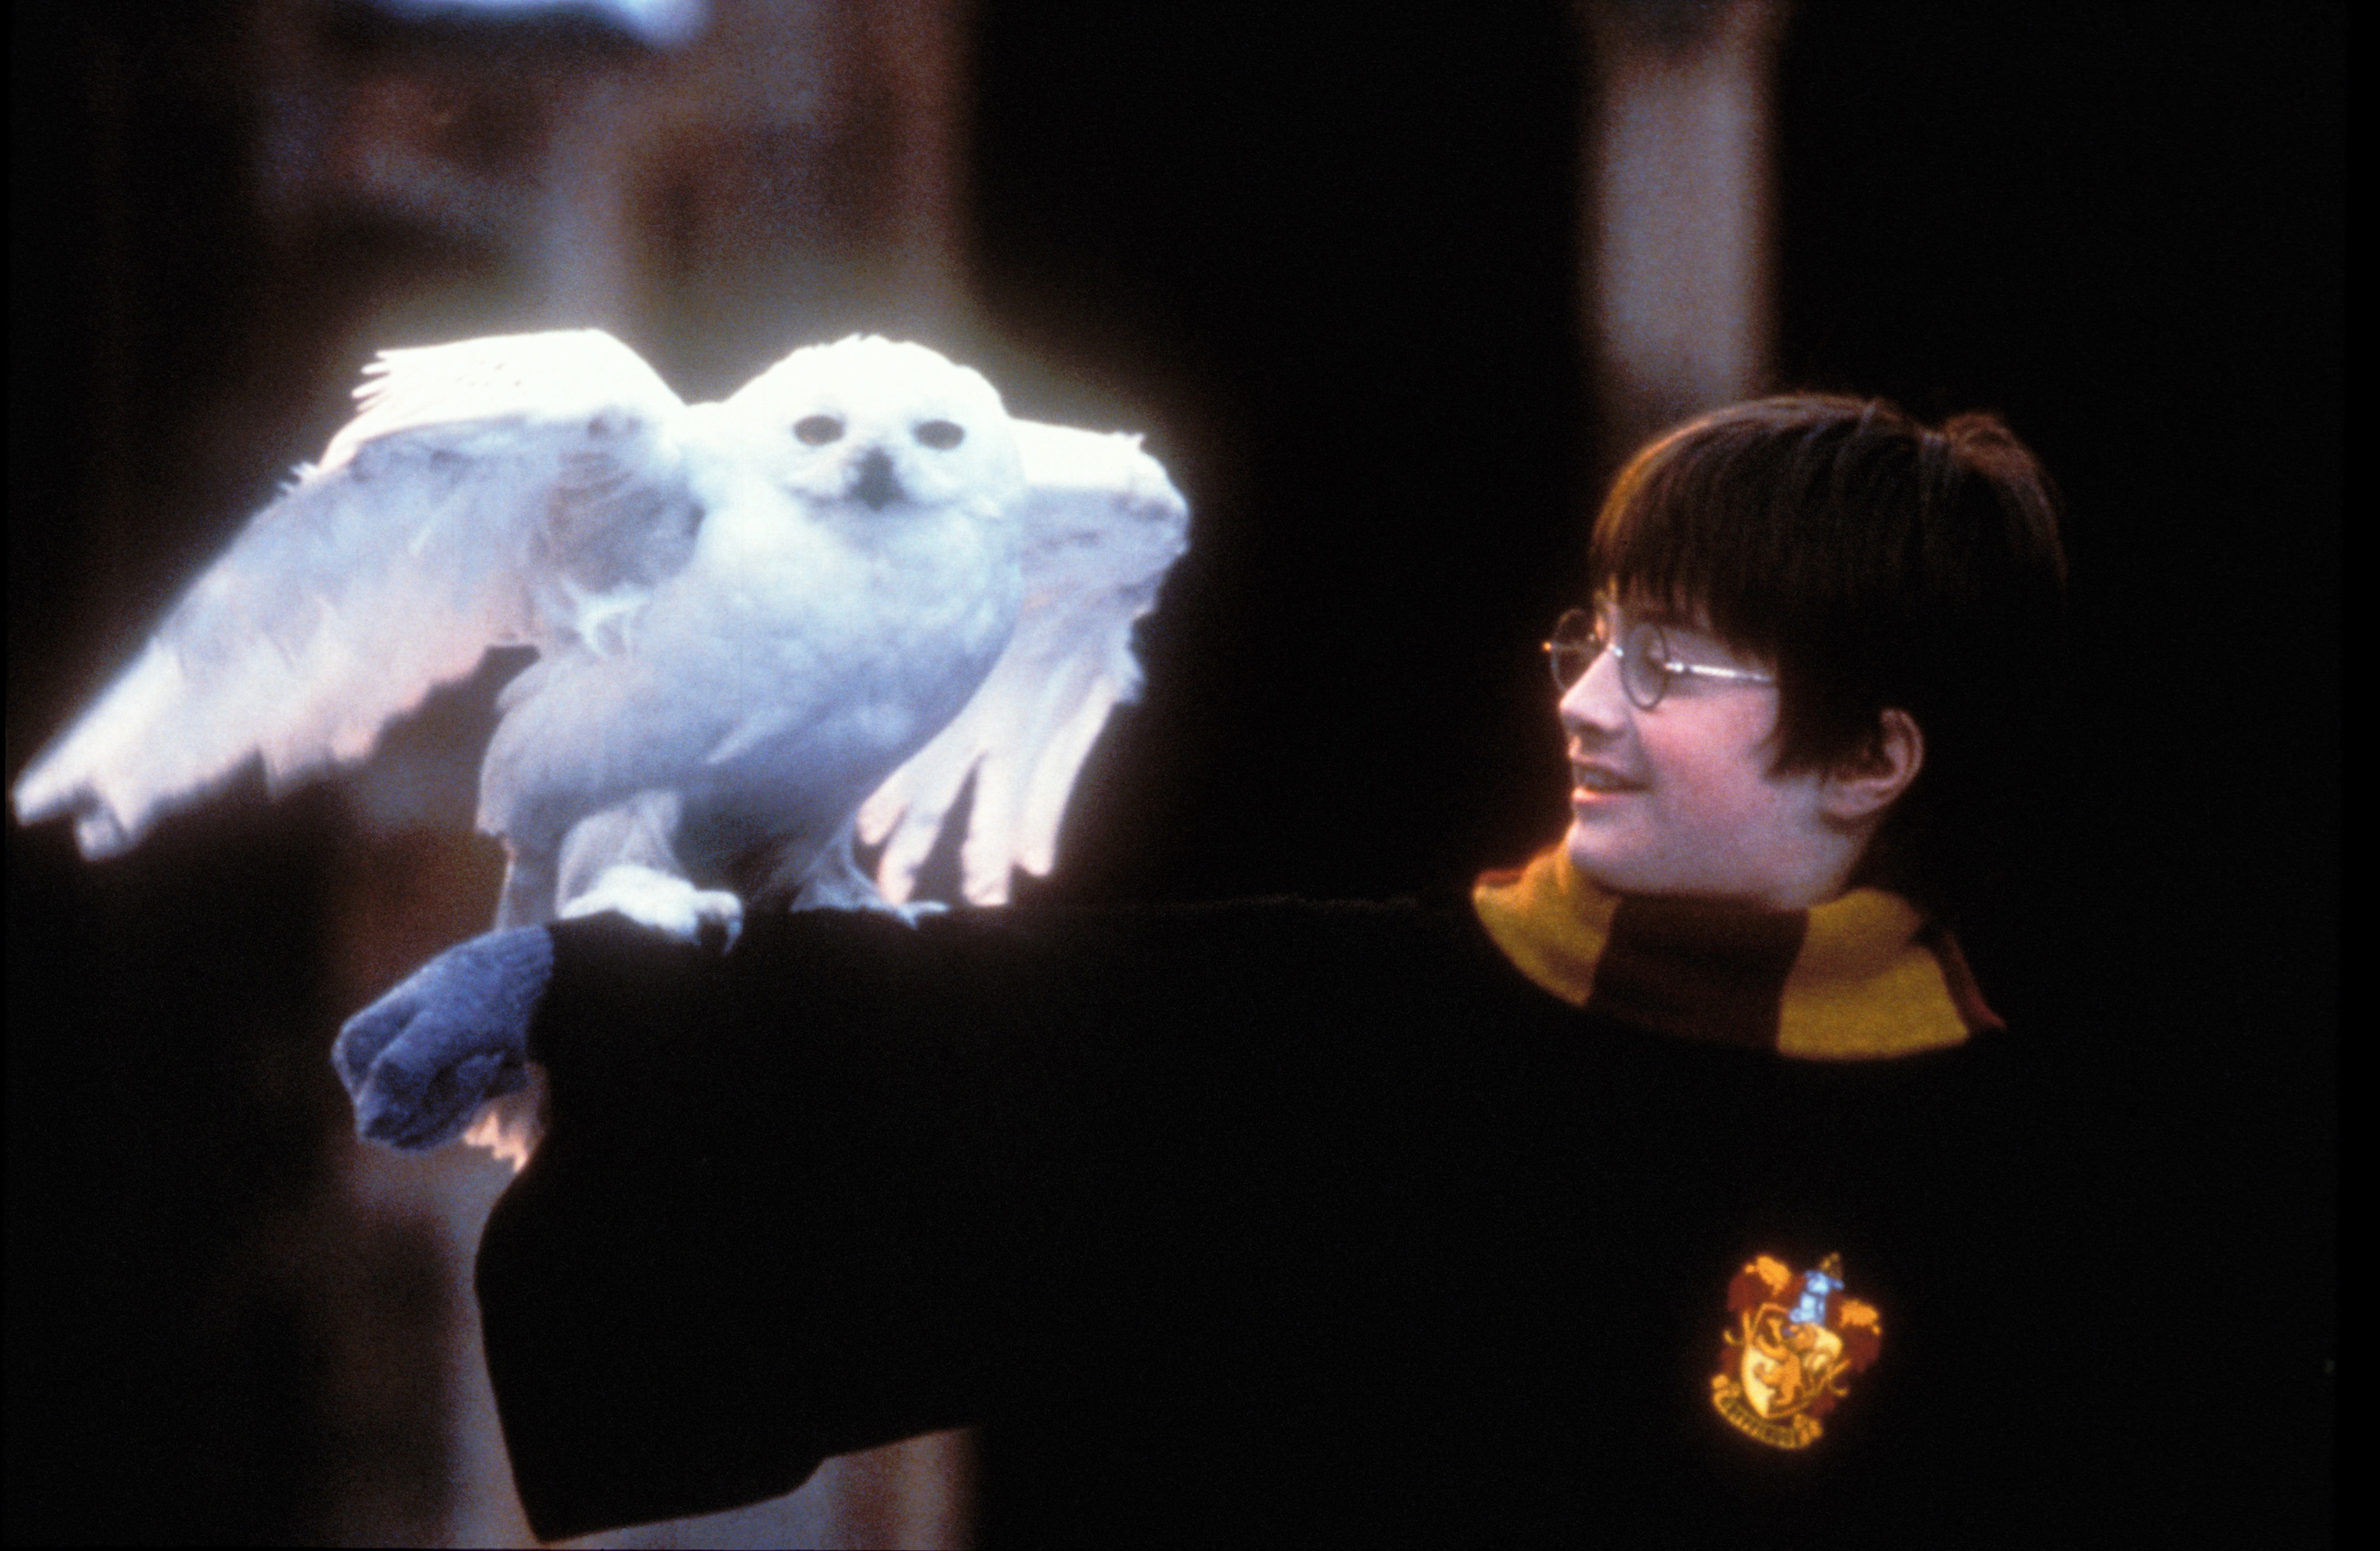 11-year-old Daniel Radcliffe, in his Harry Potter costume, grins at a brightly lit model for Harry’s snowy owl Hedwig in a promotional set photo from Harry Potter and the The Sorcerer’s Stone